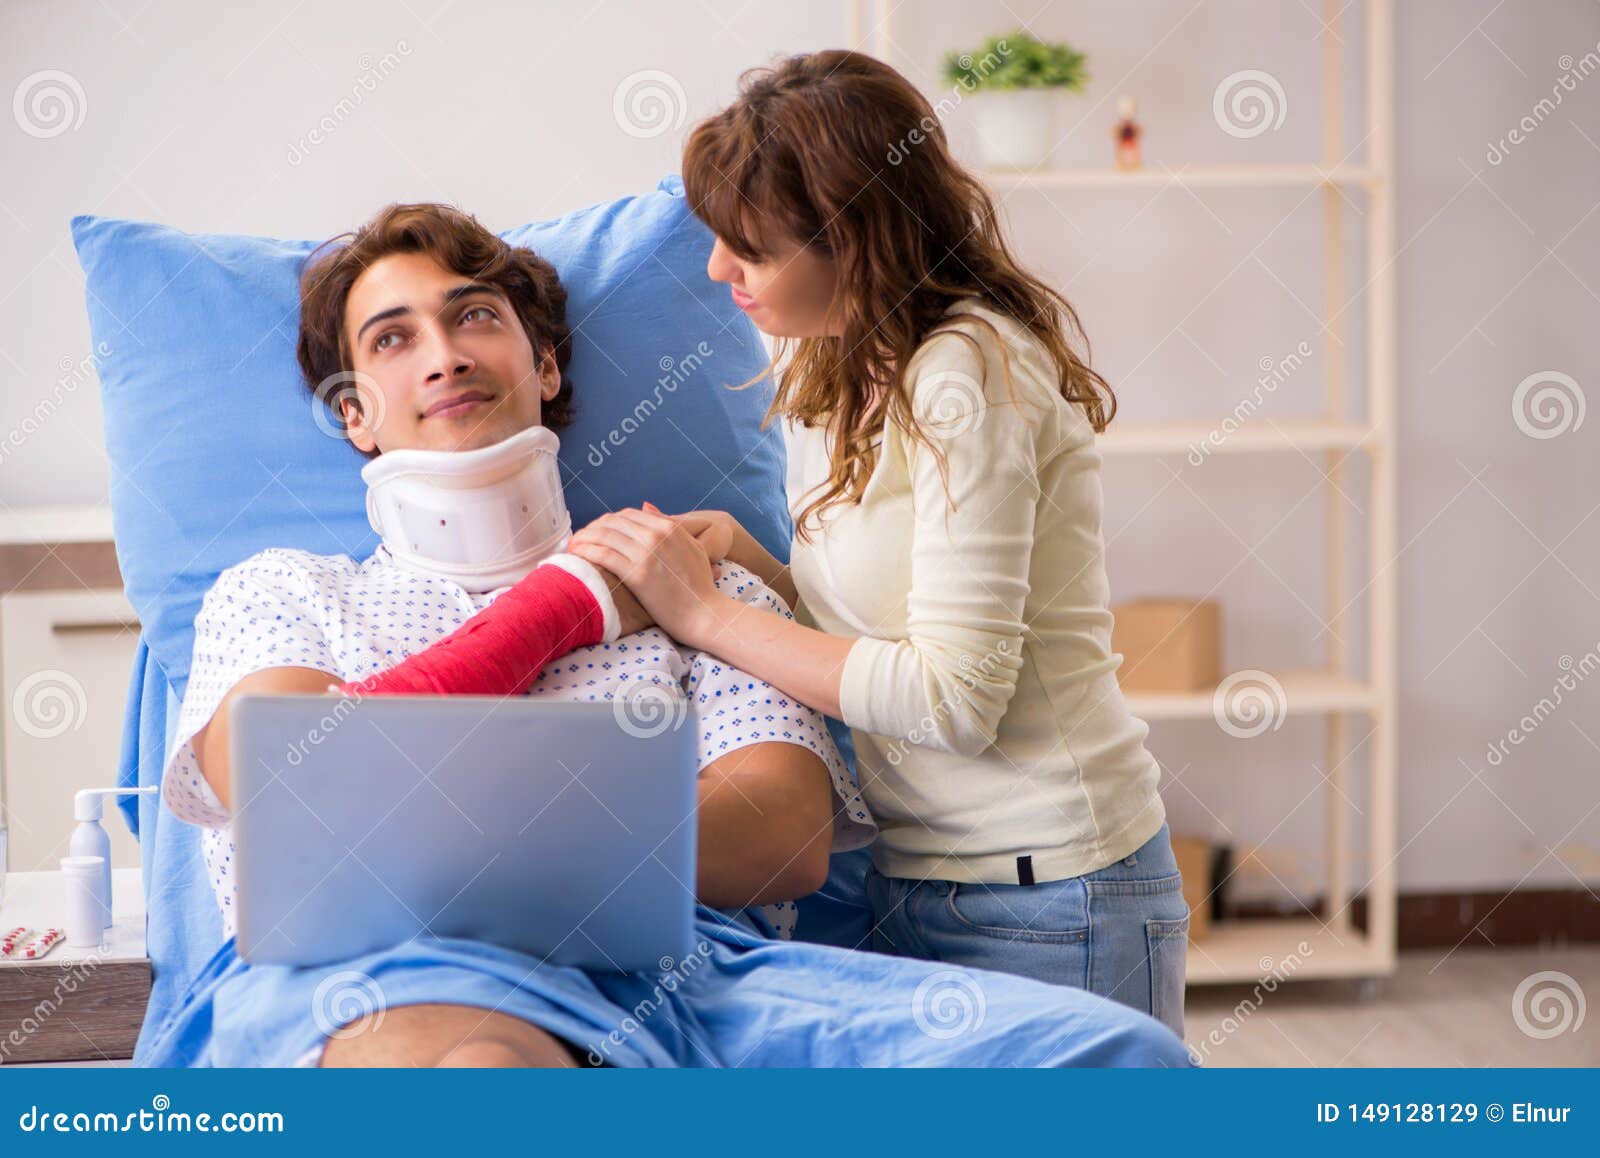 The Loving Wife Looking after Injured Husband in Hospital Stock Image ...